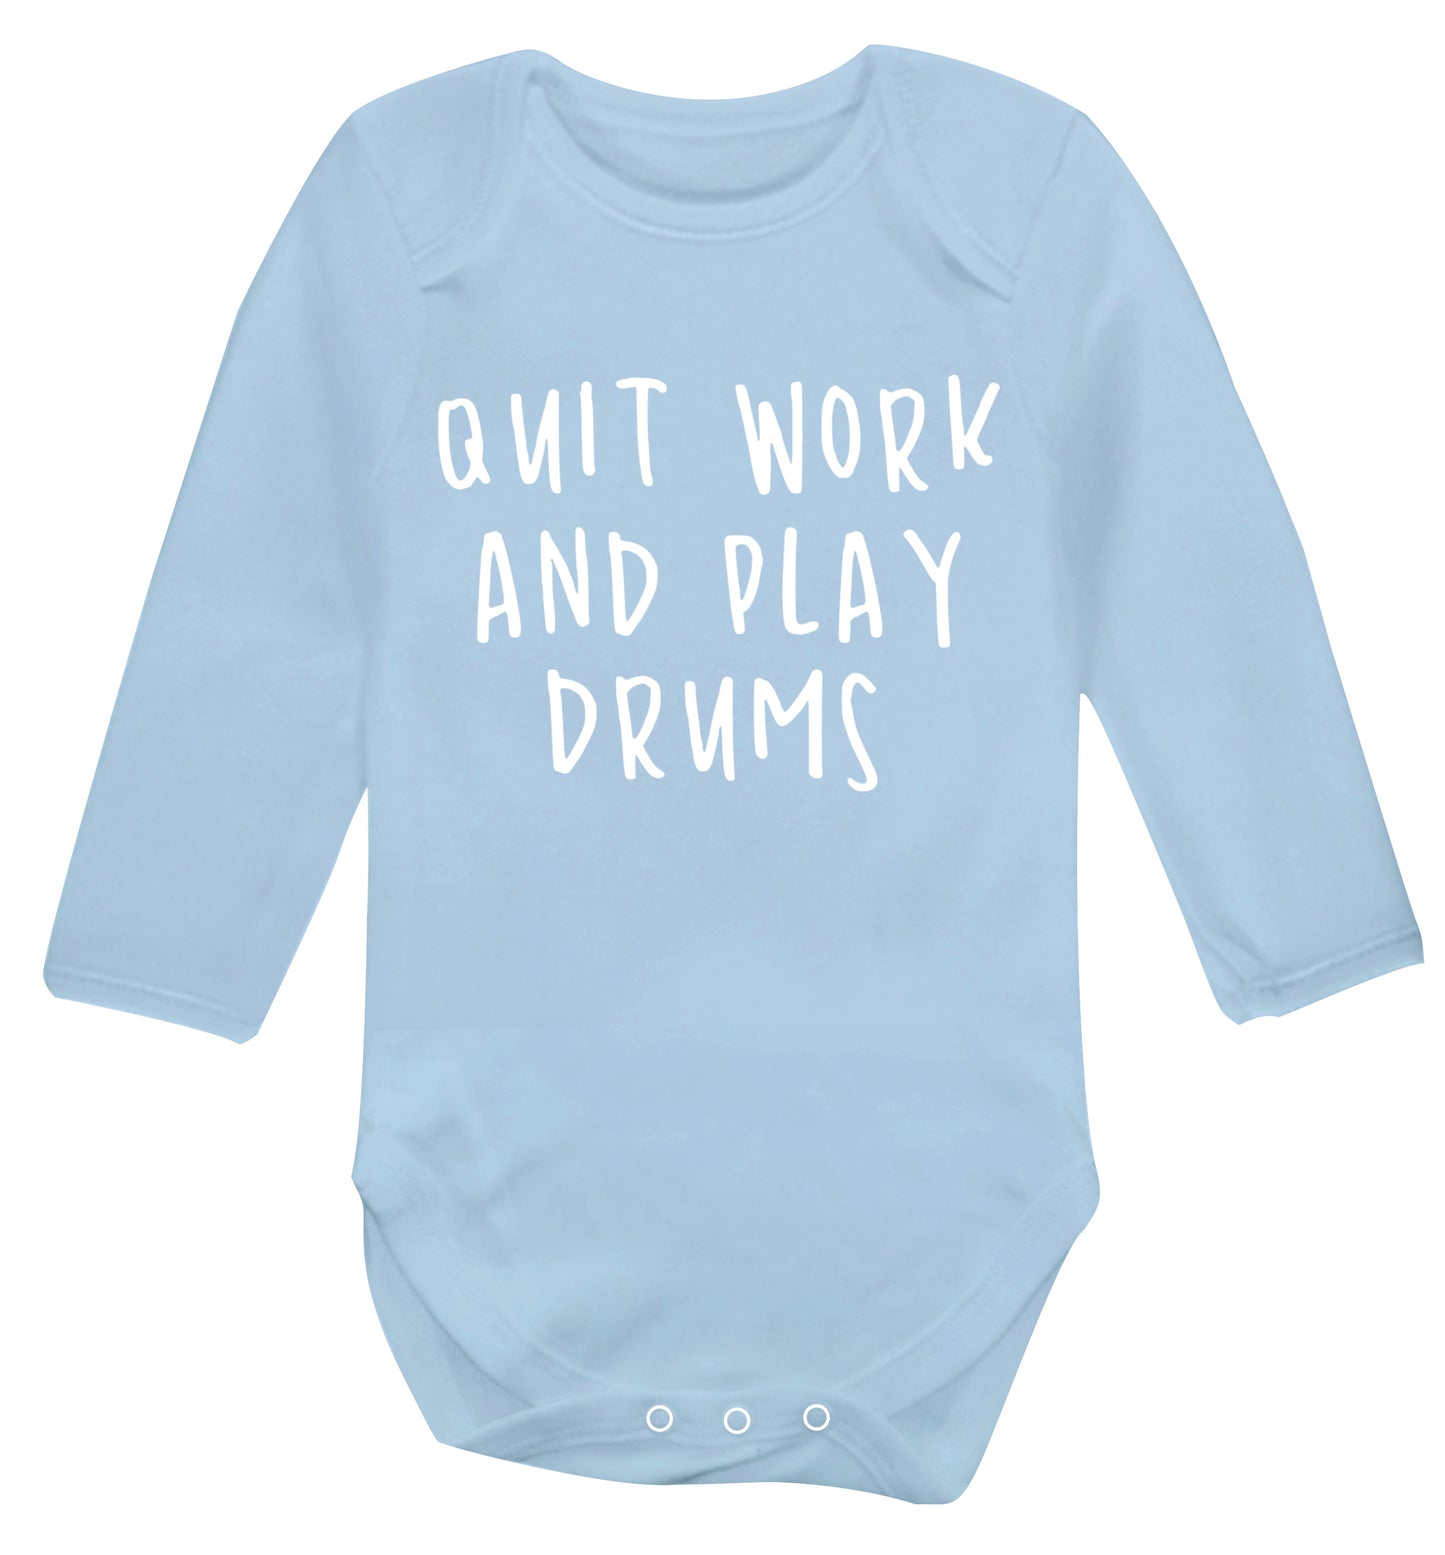 Quit work and play drums Baby Vest long sleeved pale blue 6-12 months